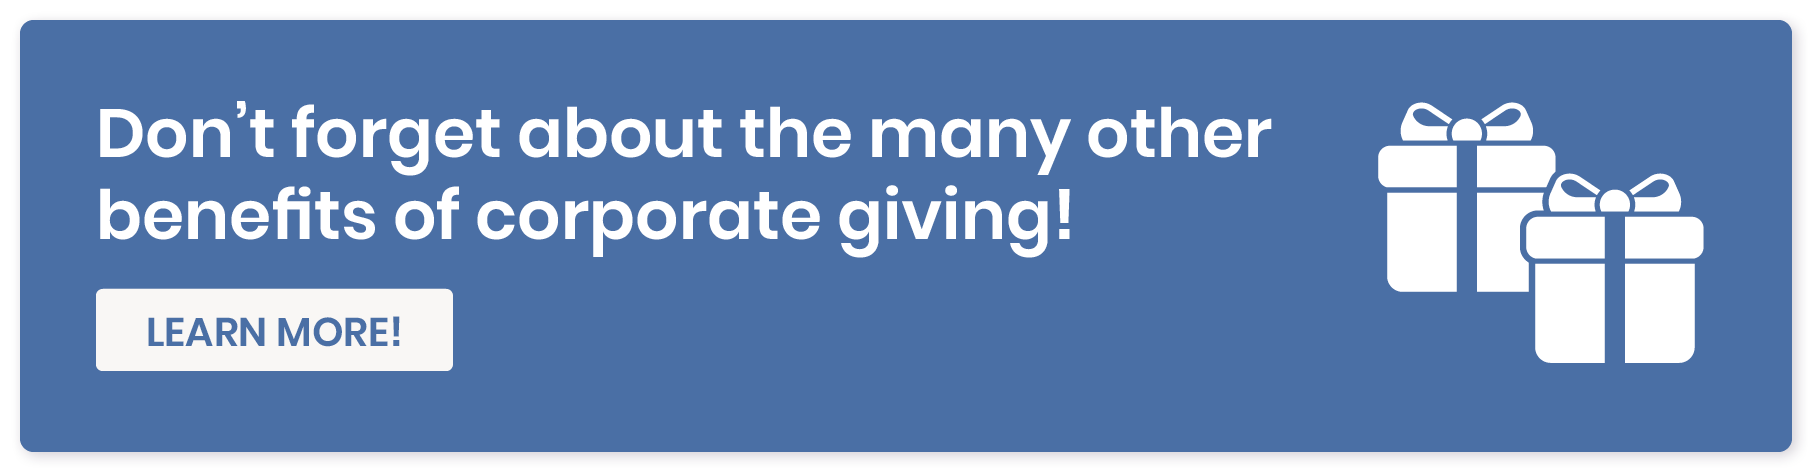 Don’t forget about the many other benefits of corporate giving! Learn more!